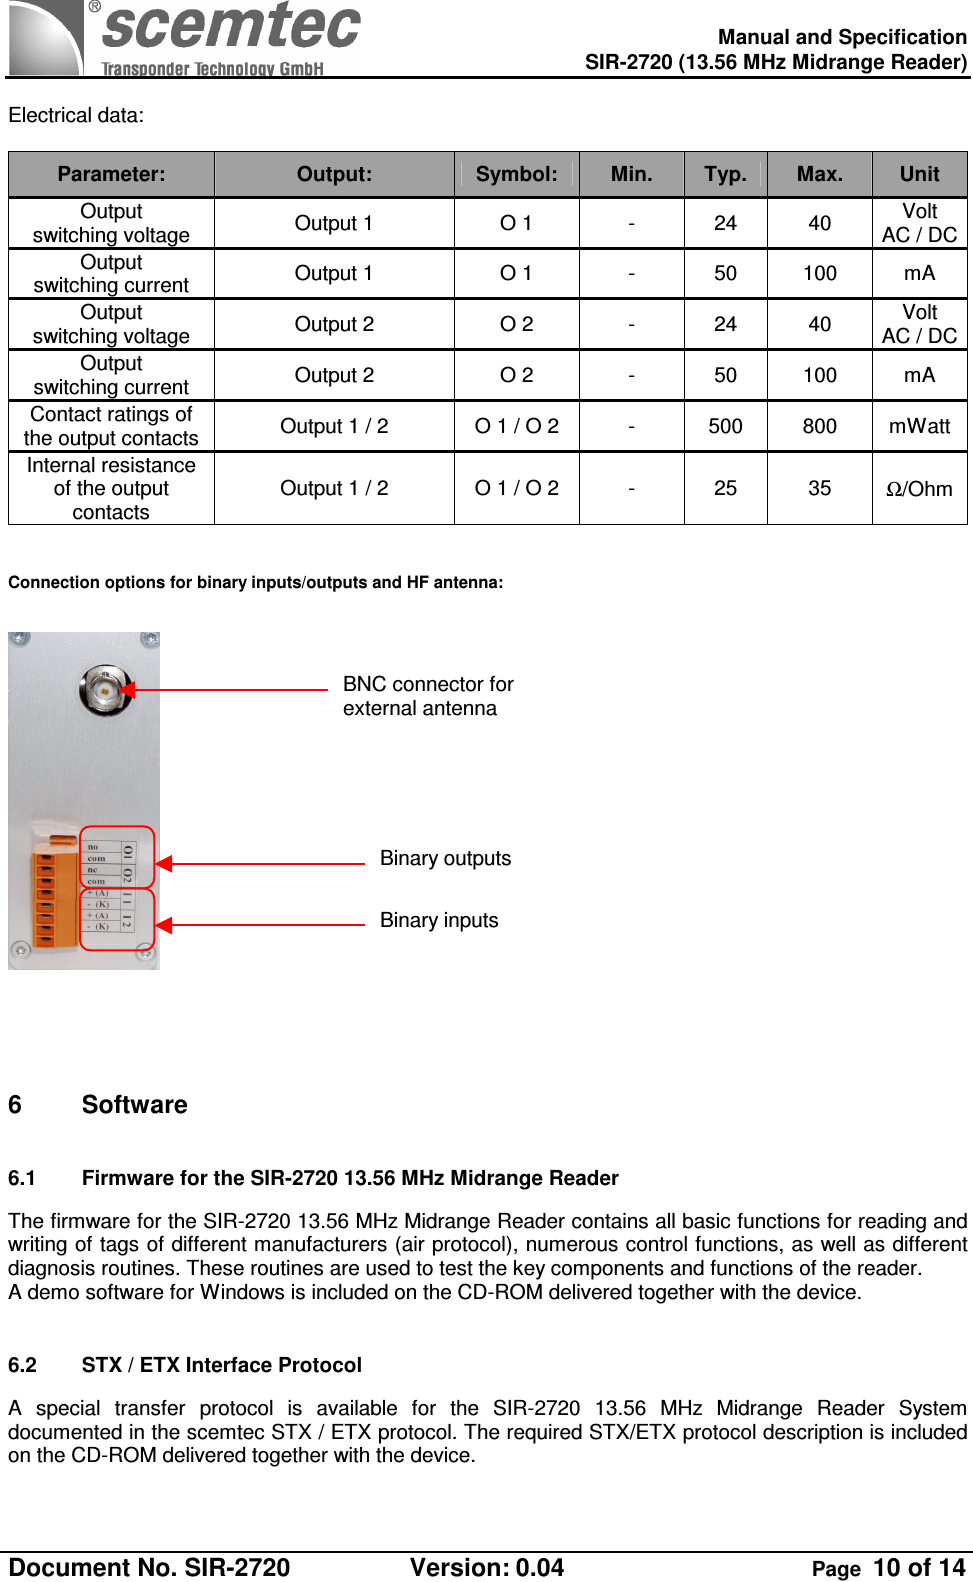    Manual and Specification  SIR-2720 (13.56 MHz Midrange Reader)  Document No. SIR-2720  Version: 0.04  Page  10 of 14   Electrical data:  Parameter: Output: Symbol: Min. Typ. Max. Unit Output switching voltage Output 1 O 1 -  24  40  Volt  AC / DC Output switching current Output 1 O 1 -  50  100  mA Output switching voltage Output 2 O 2 -  24  40  Volt  AC / DC Output switching current Output 2 O 2 -  50  100  mA Contact ratings of the output contacts Output 1 / 2 O 1 / O 2 -  500  800  mWatt Internal resistance of the output contacts Output 1 / 2 O 1 / O 2 -  25  35  Ω/Ohm   Connection options for binary inputs/outputs and HF antenna:        6  Software 6.1  Firmware for the SIR-2720 13.56 MHz Midrange Reader    The firmware for the SIR-2720 13.56 MHz Midrange Reader contains all basic functions for reading and writing of tags of different manufacturers (air protocol), numerous control functions, as well as different diagnosis routines. These routines are used to test the key components and functions of the reader.  A demo software for Windows is included on the CD-ROM delivered together with the device.  6.2  STX / ETX Interface Protocol  A  special  transfer  protocol  is  available  for  the  SIR-2720  13.56  MHz  Midrange  Reader  System documented in the scemtec STX / ETX protocol. The required STX/ETX protocol description is included on the CD-ROM delivered together with the device.   BNC connector for external antenna Binary outputs Binary inputs 